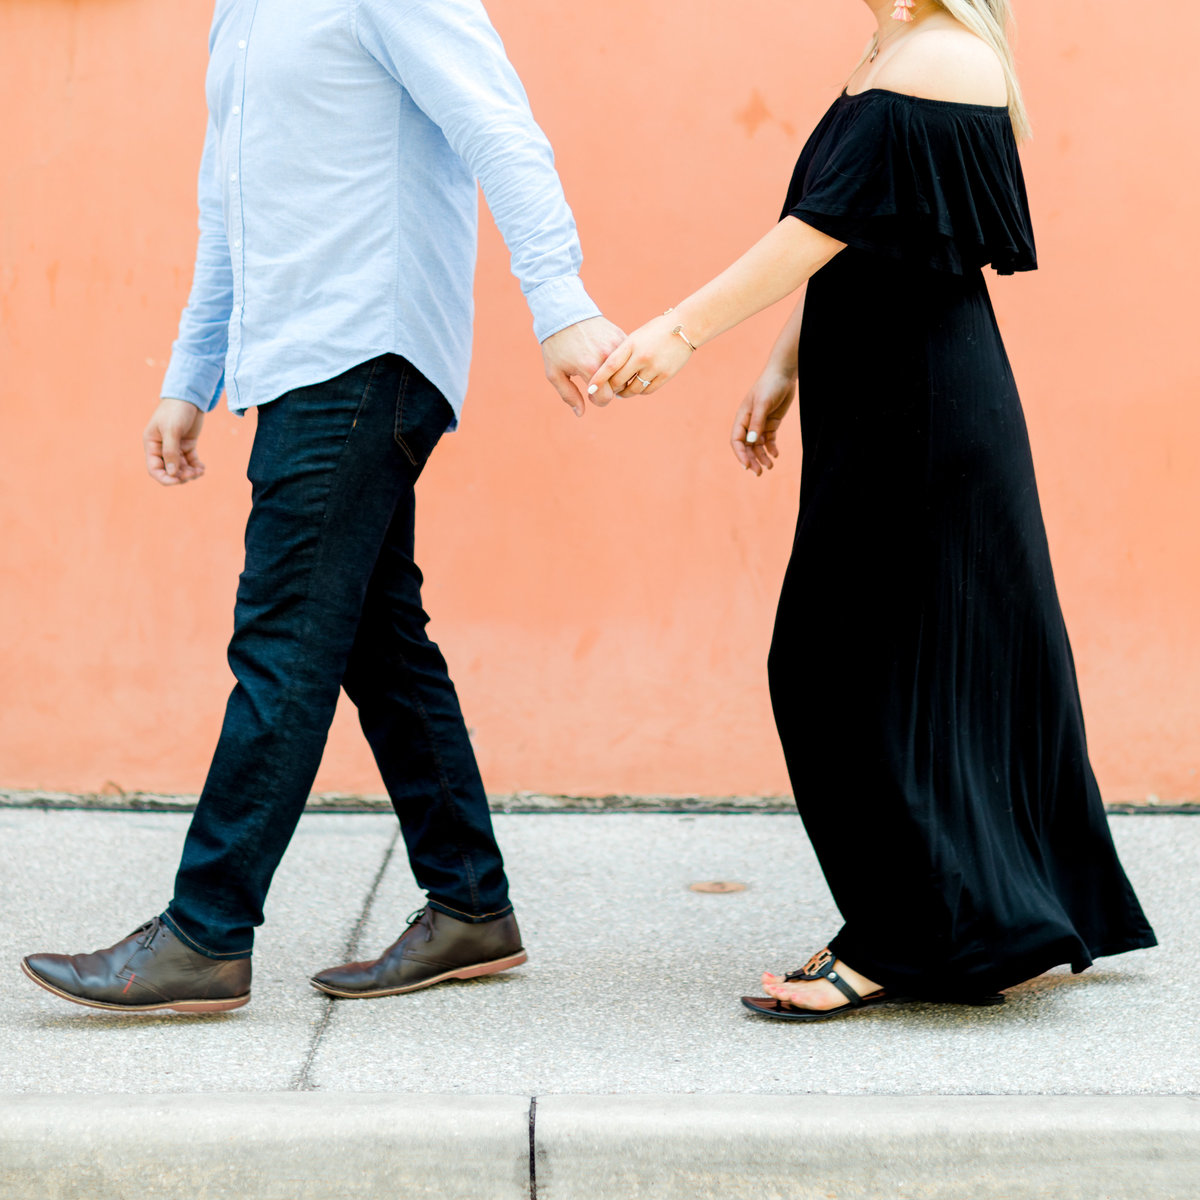 St. Augustine Engagement and Elopement Photos